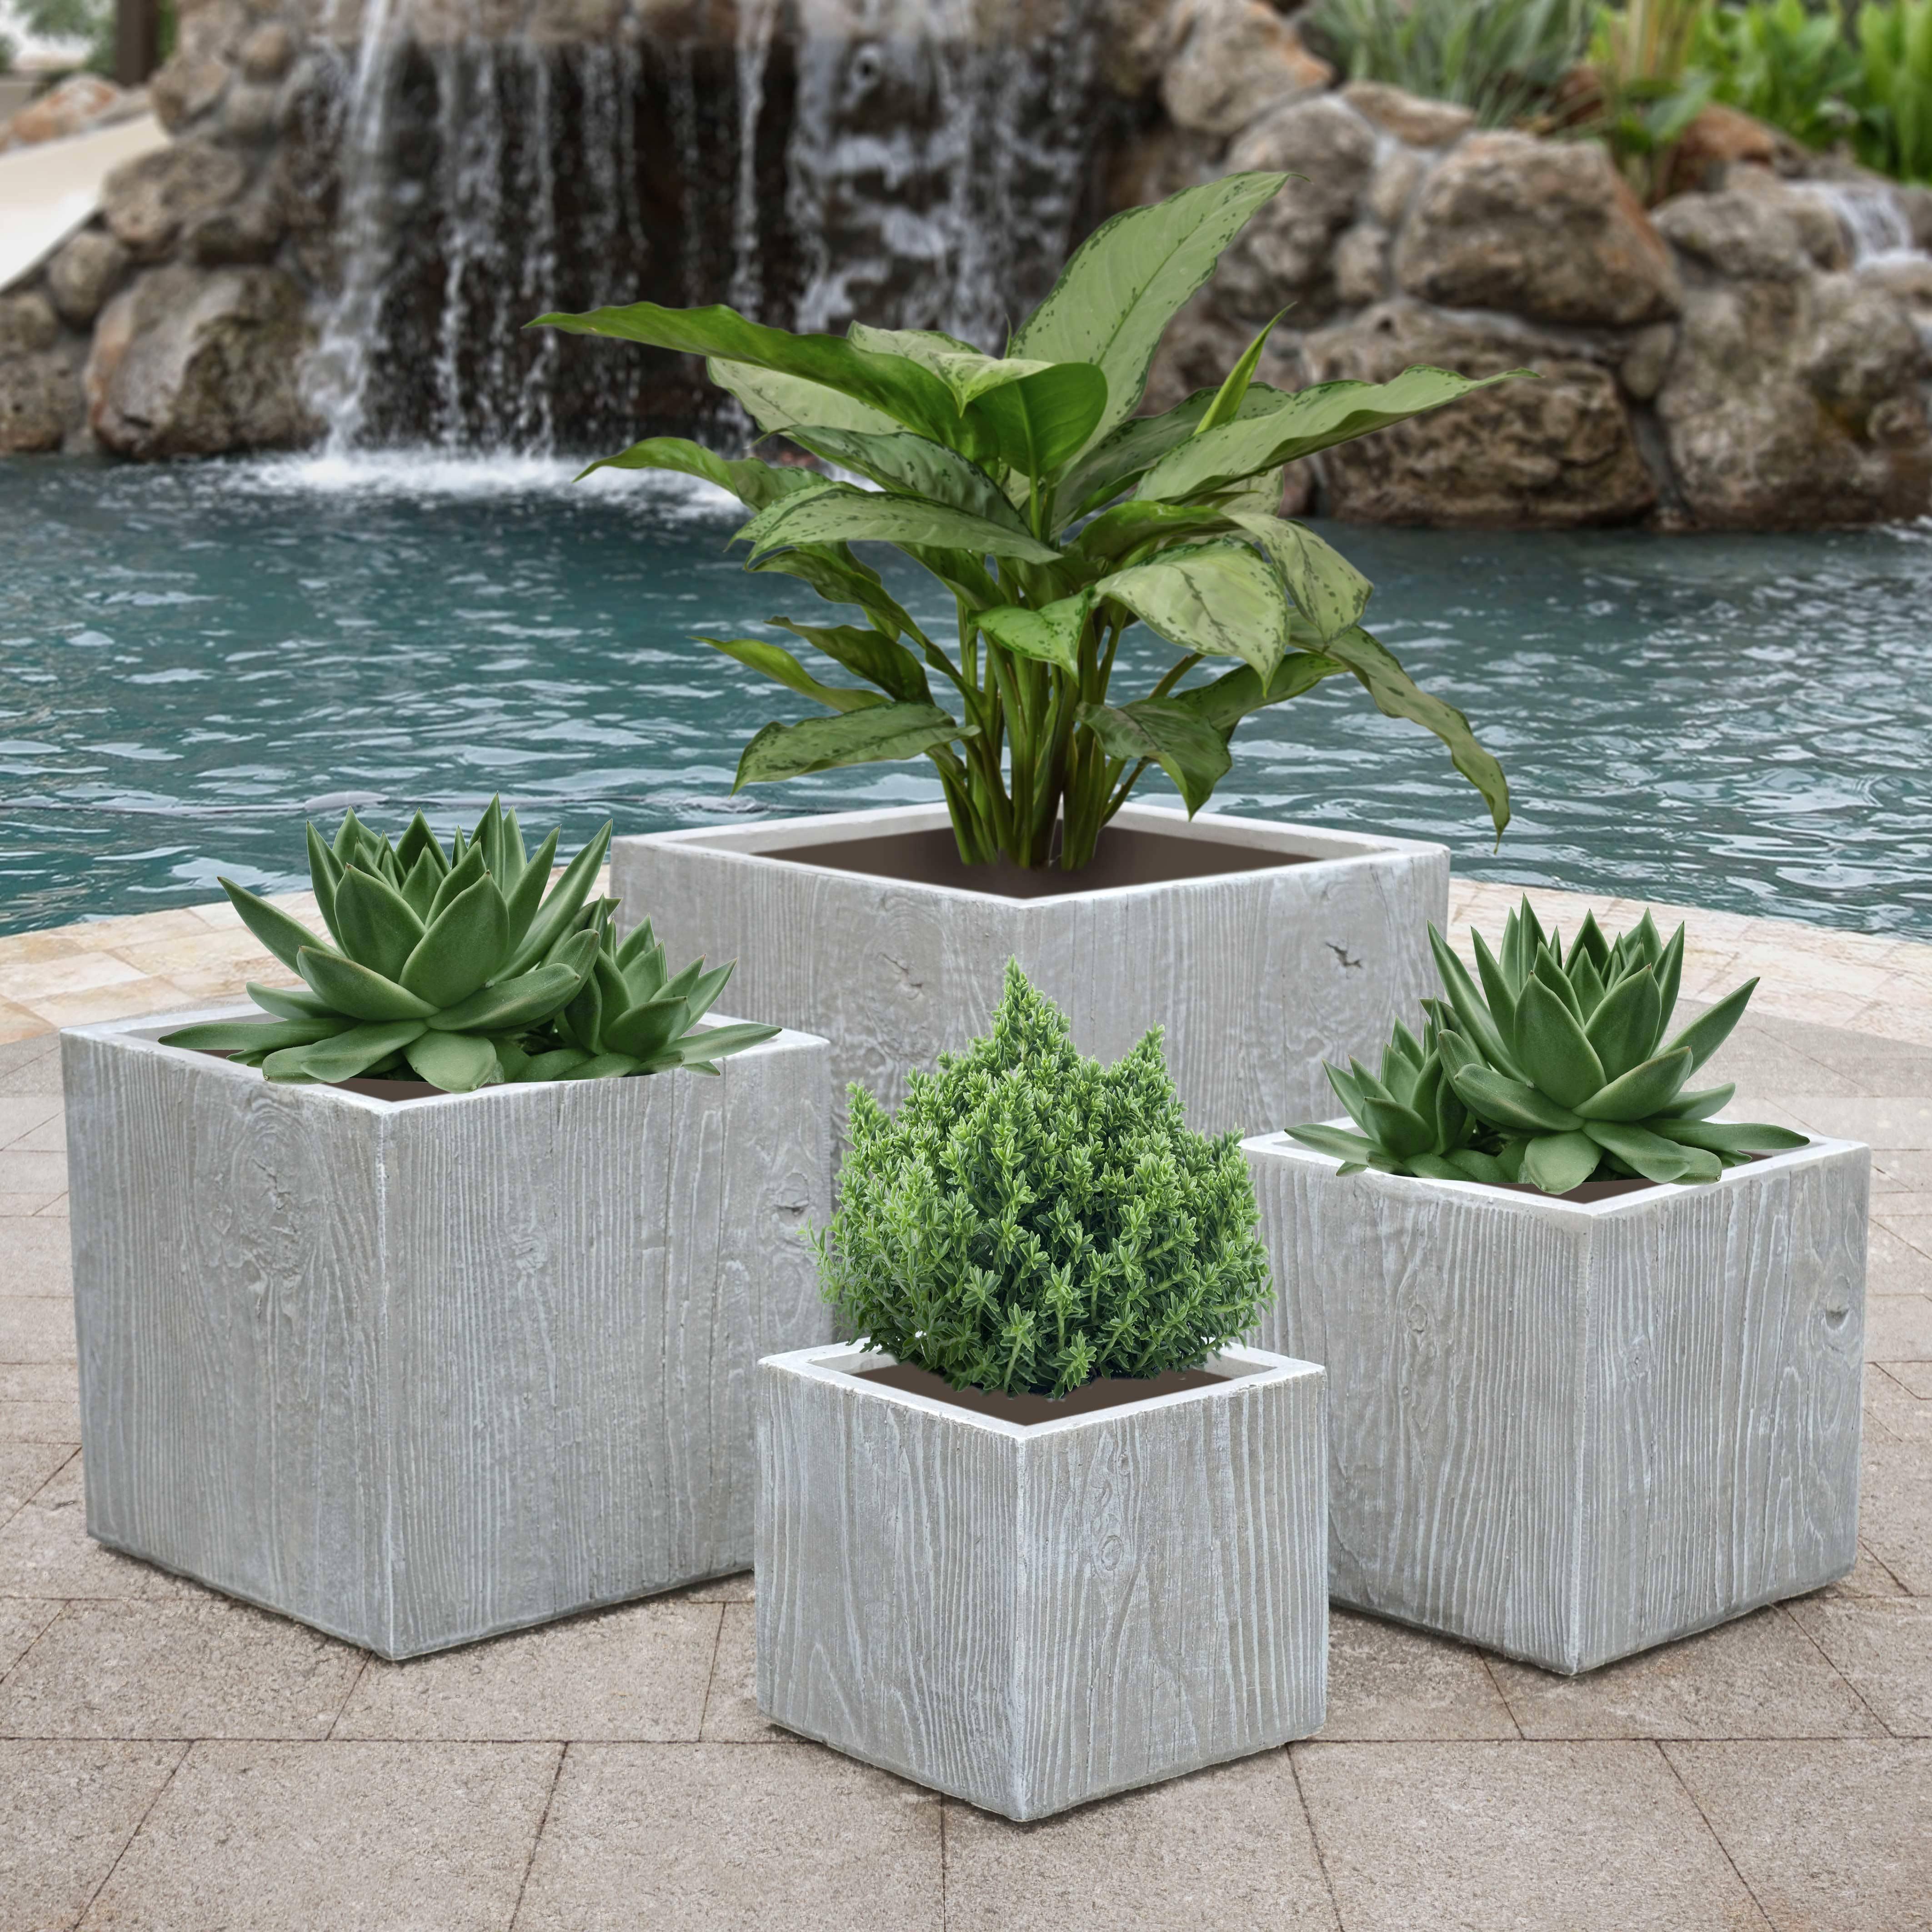 AFD Home Outdoor Decor Wood Design Planters Set of 4 in Gray Finish